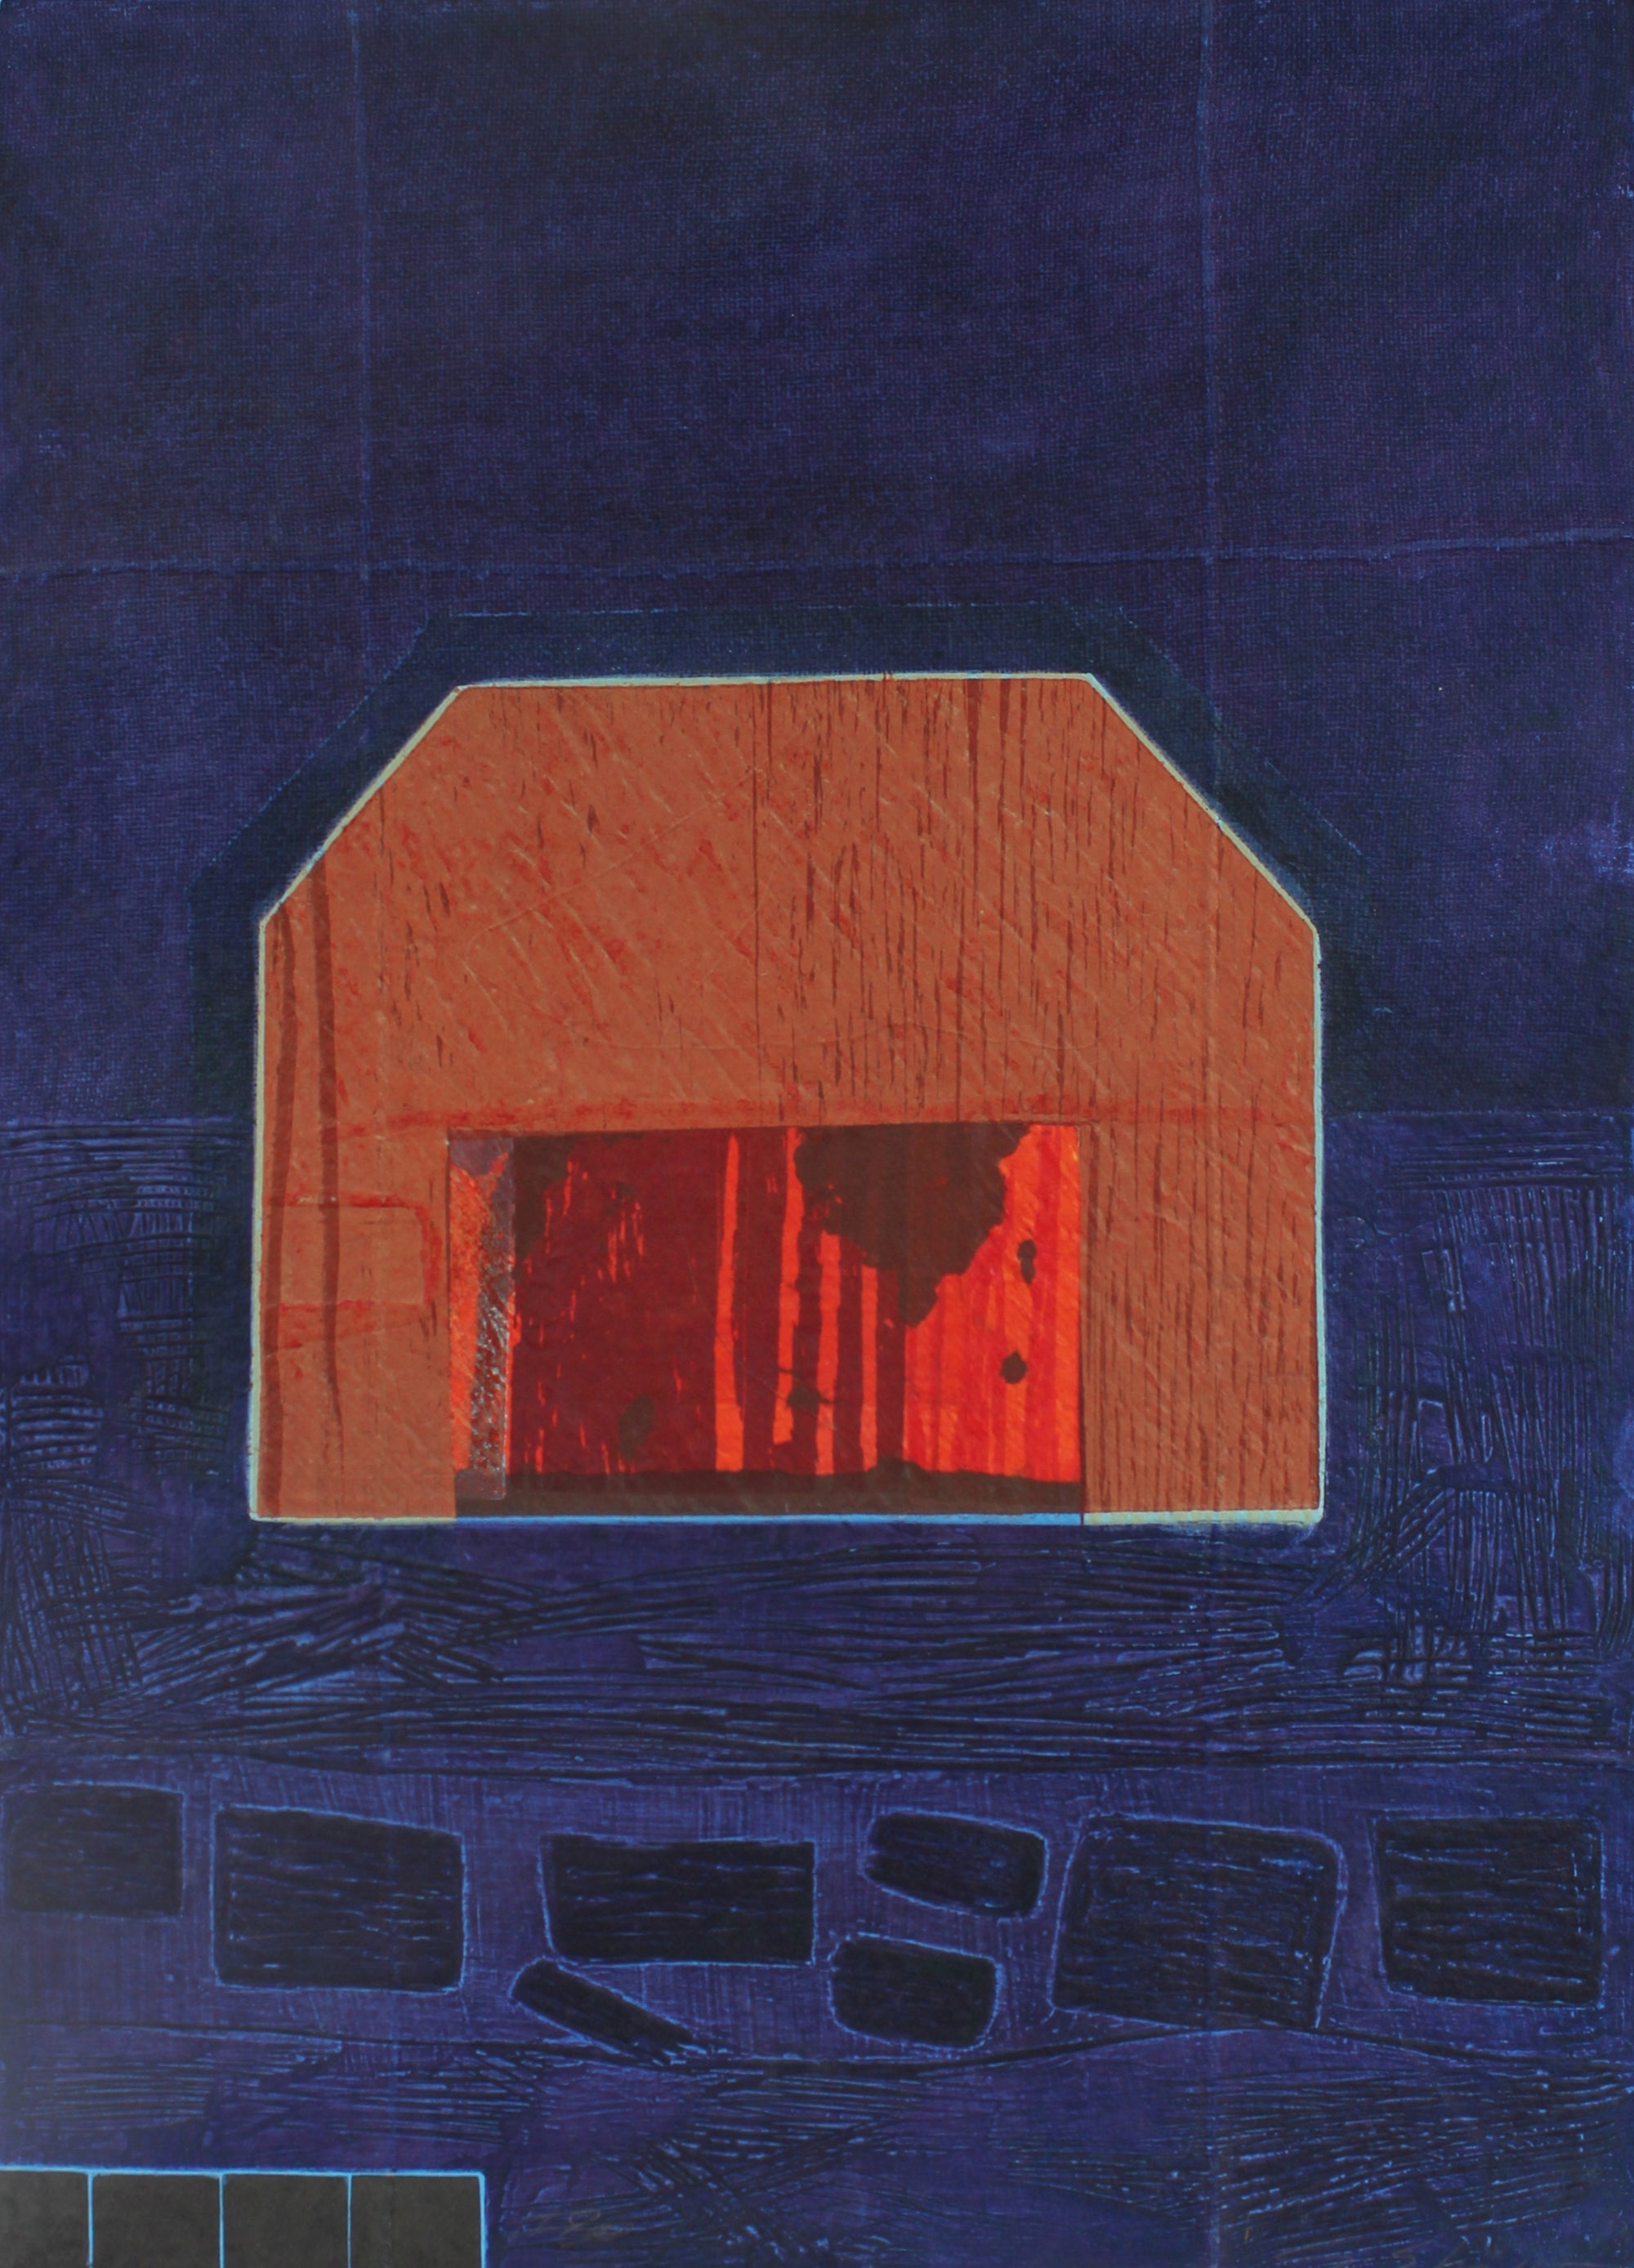 Abstracted Image of a House <br>1984-1988 Collograph on Handmade Paper with String <br><br>#93463